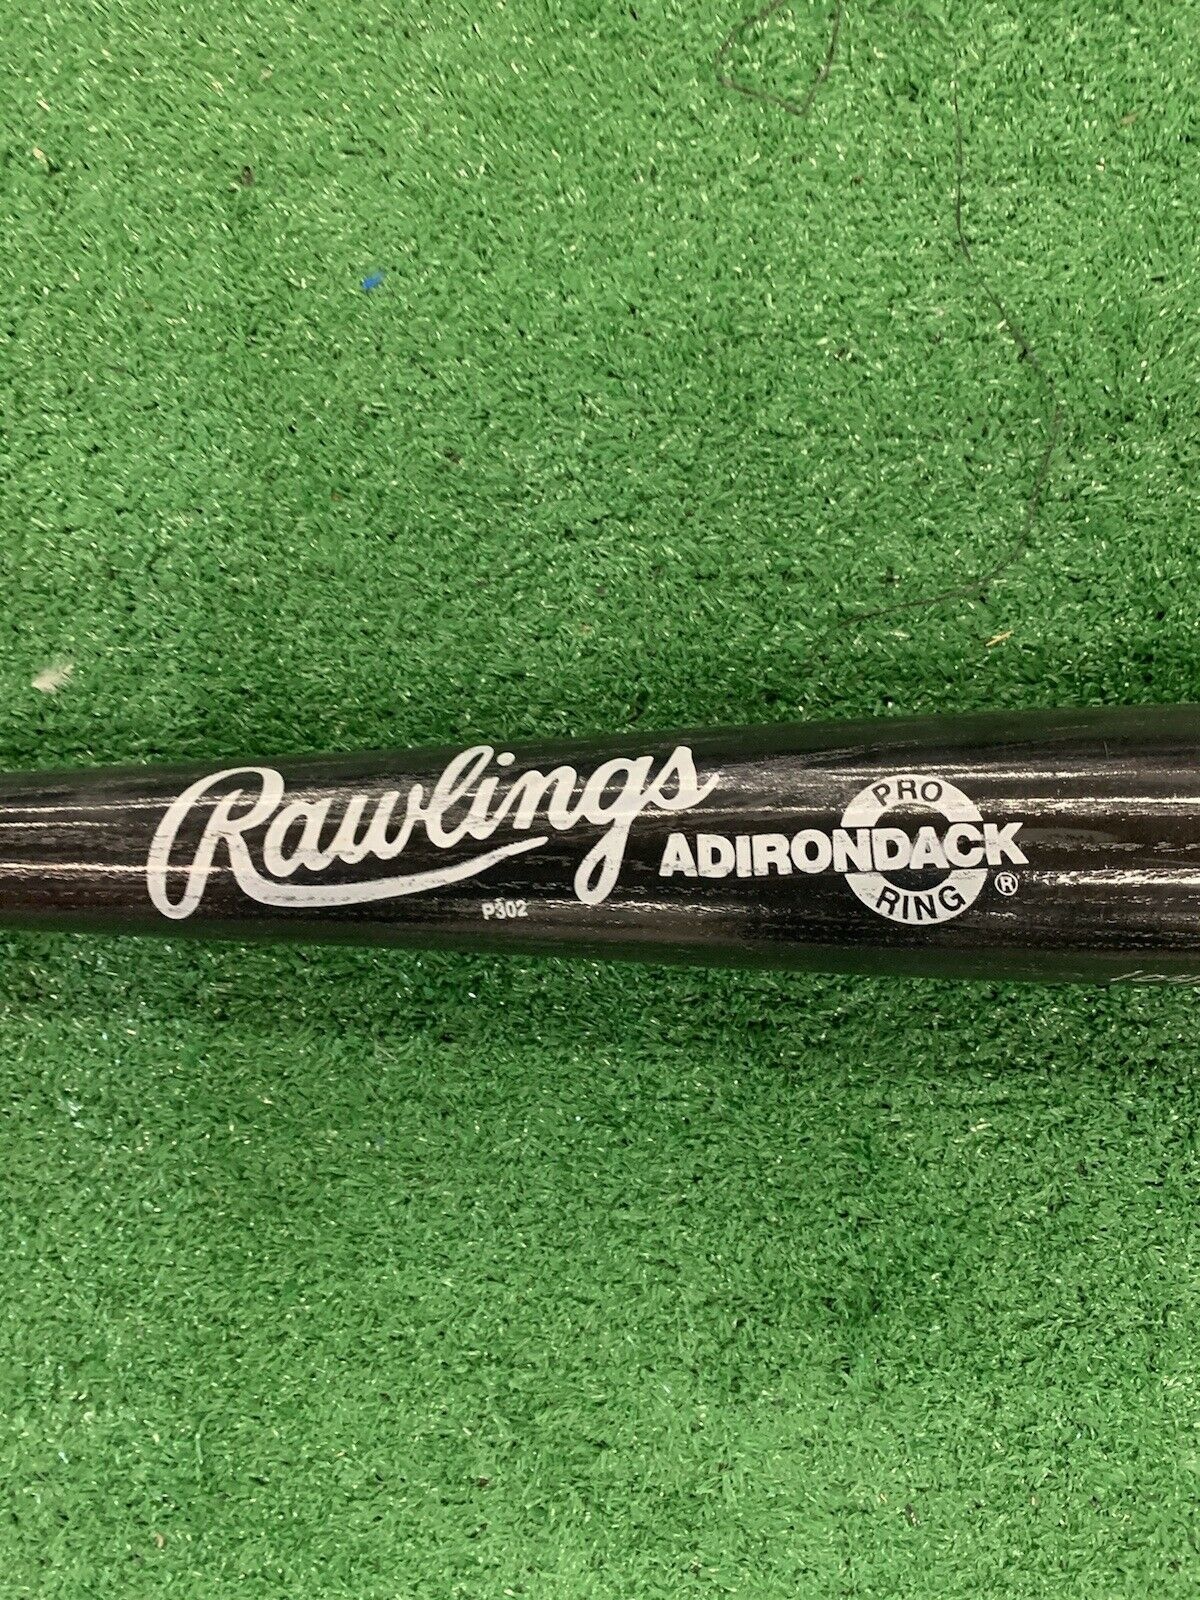 Rickey Henderson Signed Oakland Athletics Rawlings Hall of Fame